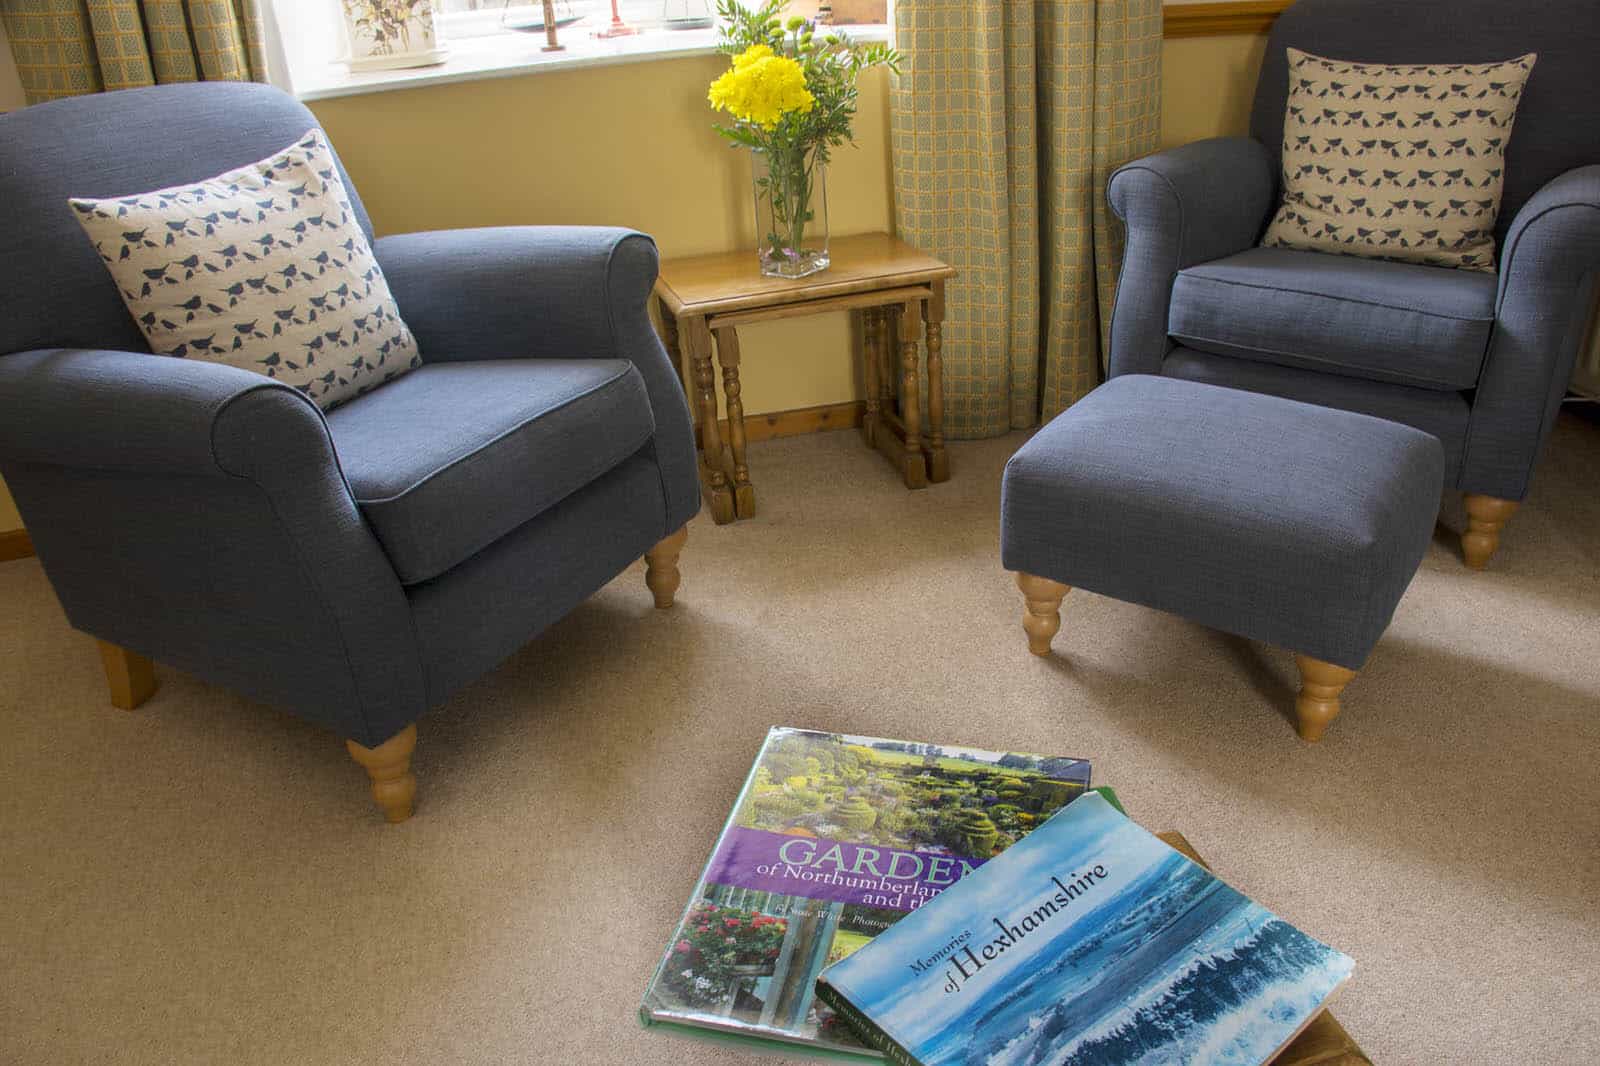 Comfortable sitting room and tourist information for guests